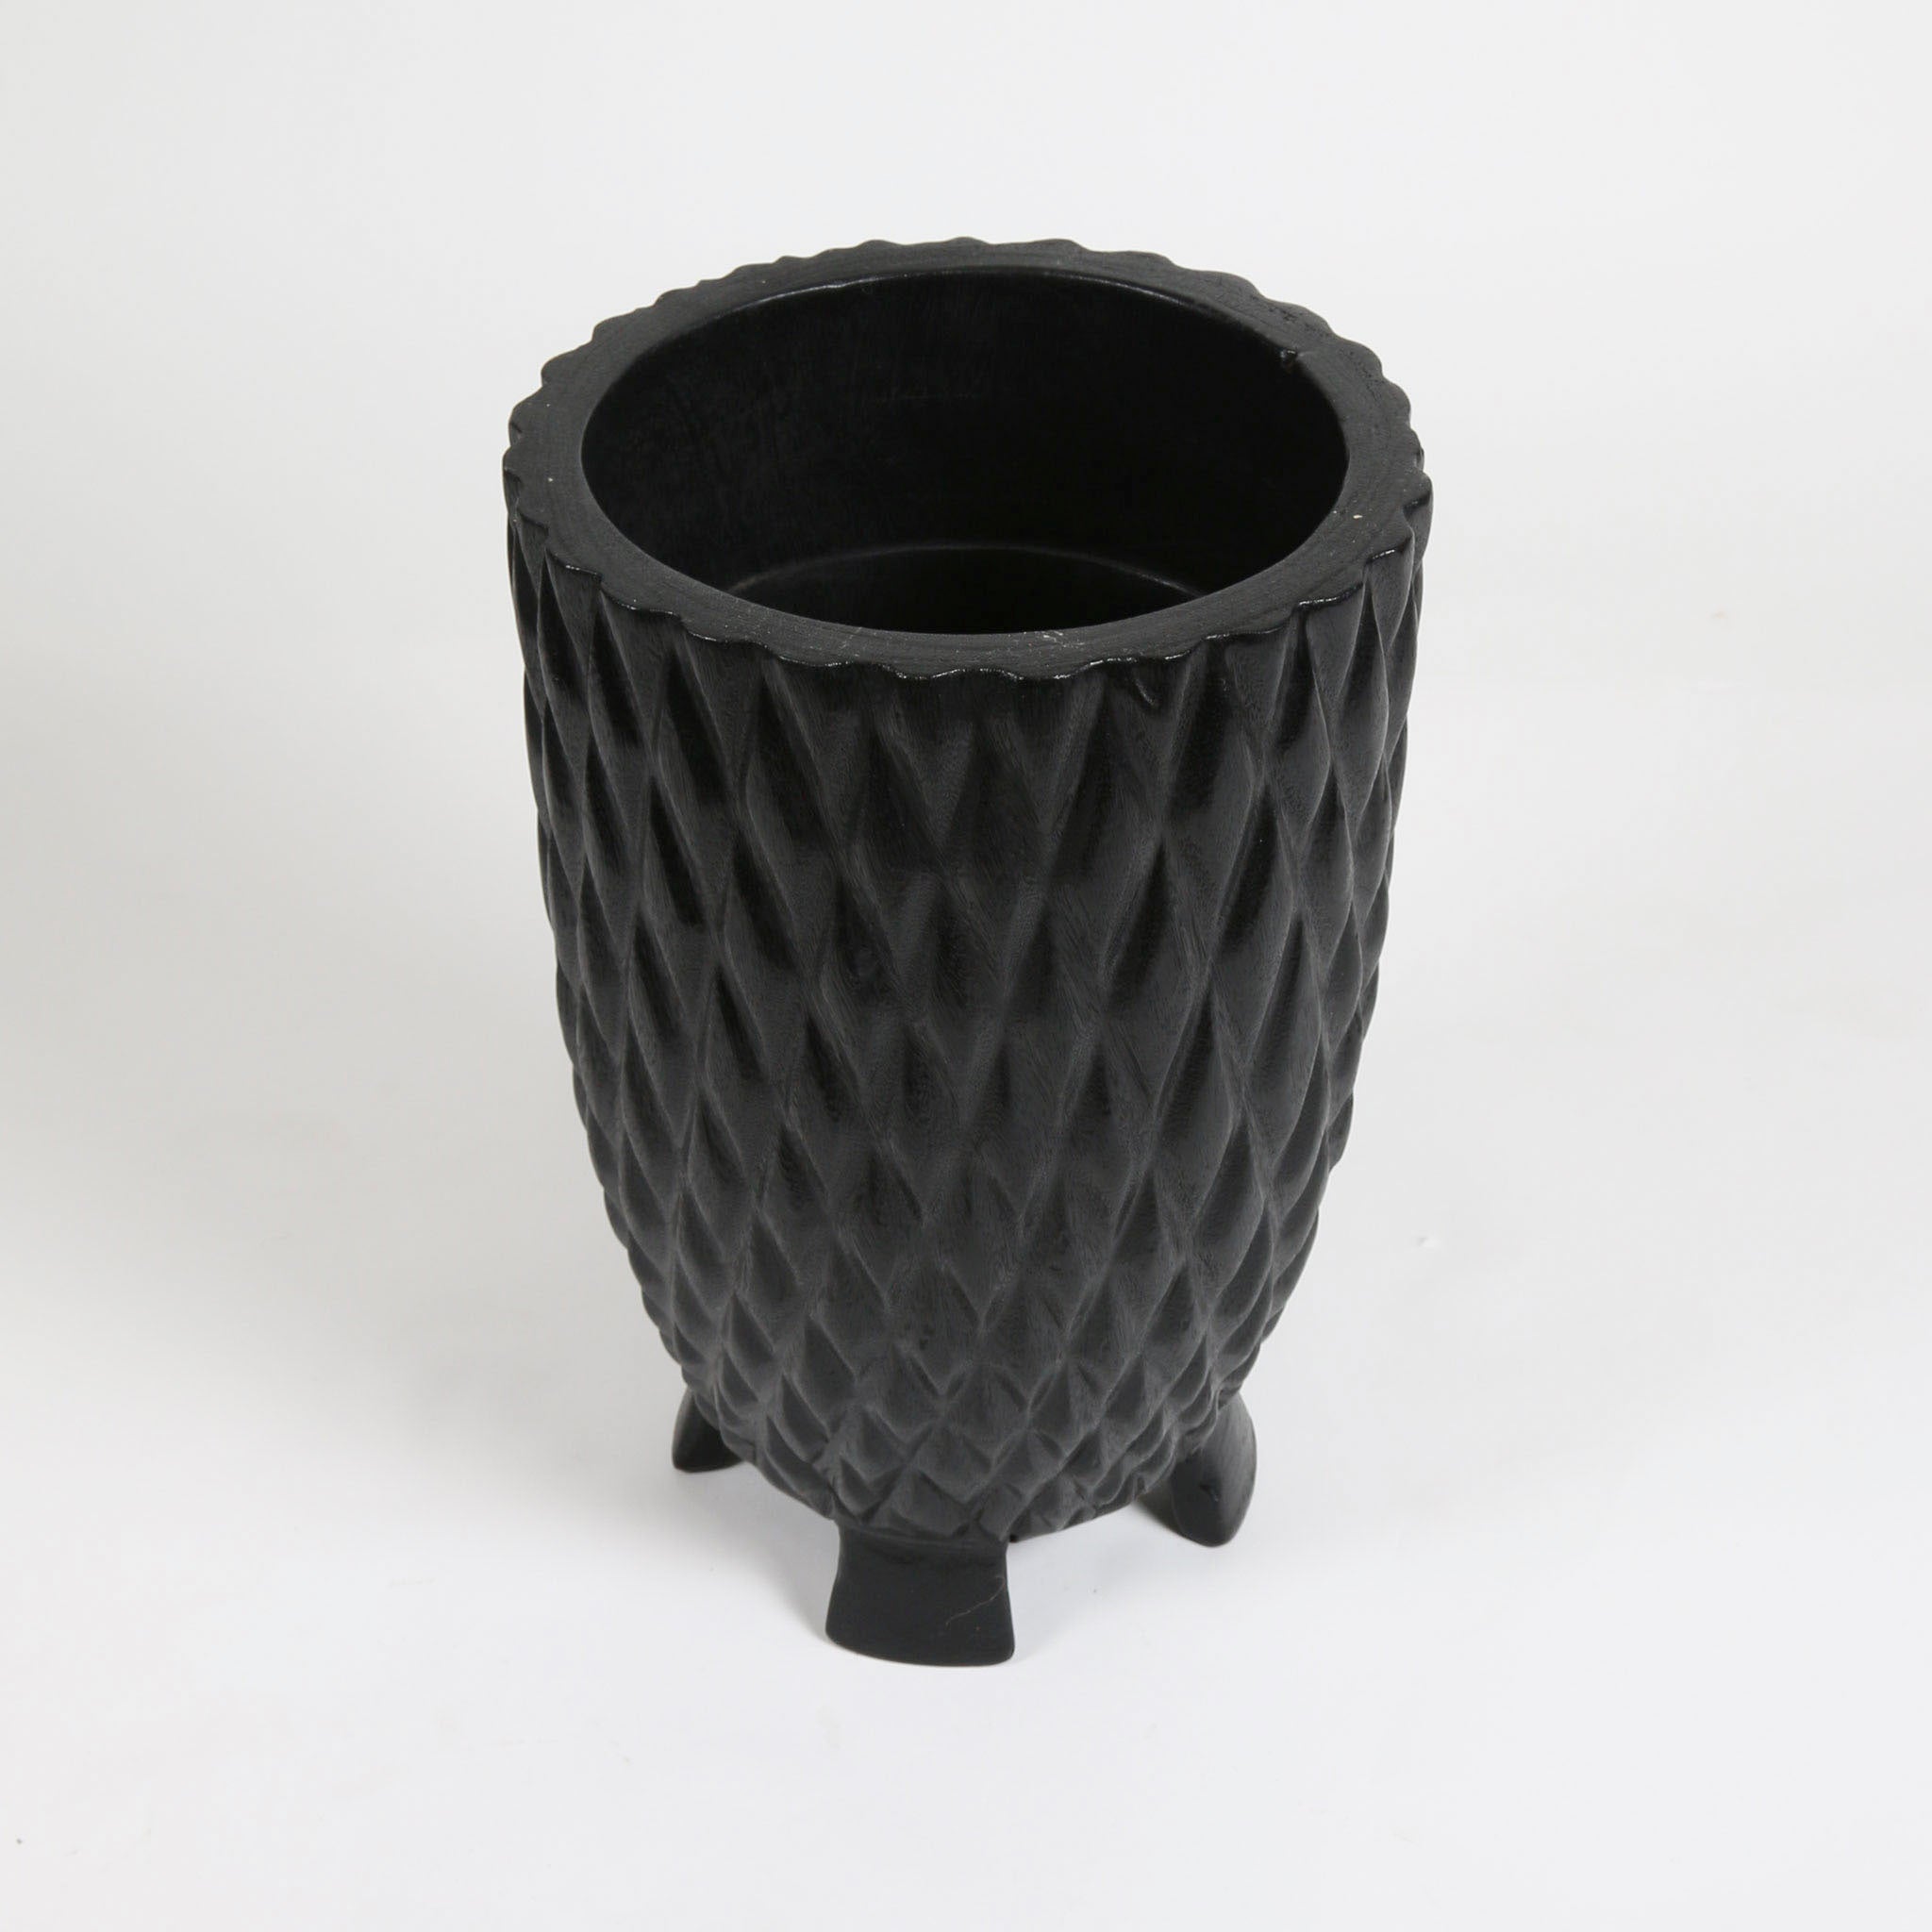 Black Carved Wooden Vase with Feet